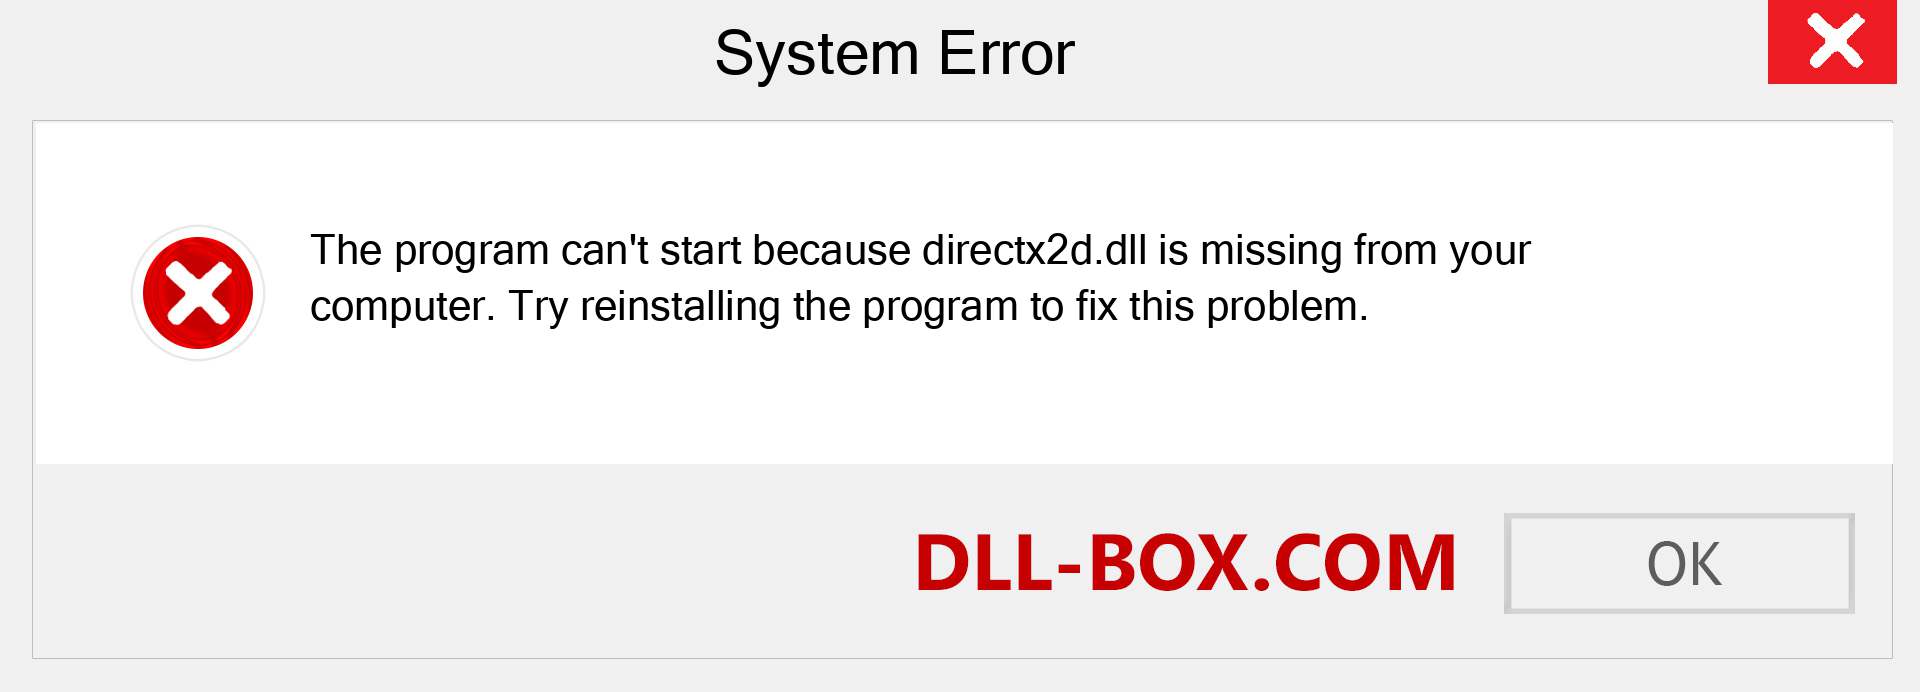  directx2d.dll file is missing?. Download for Windows 7, 8, 10 - Fix  directx2d dll Missing Error on Windows, photos, images